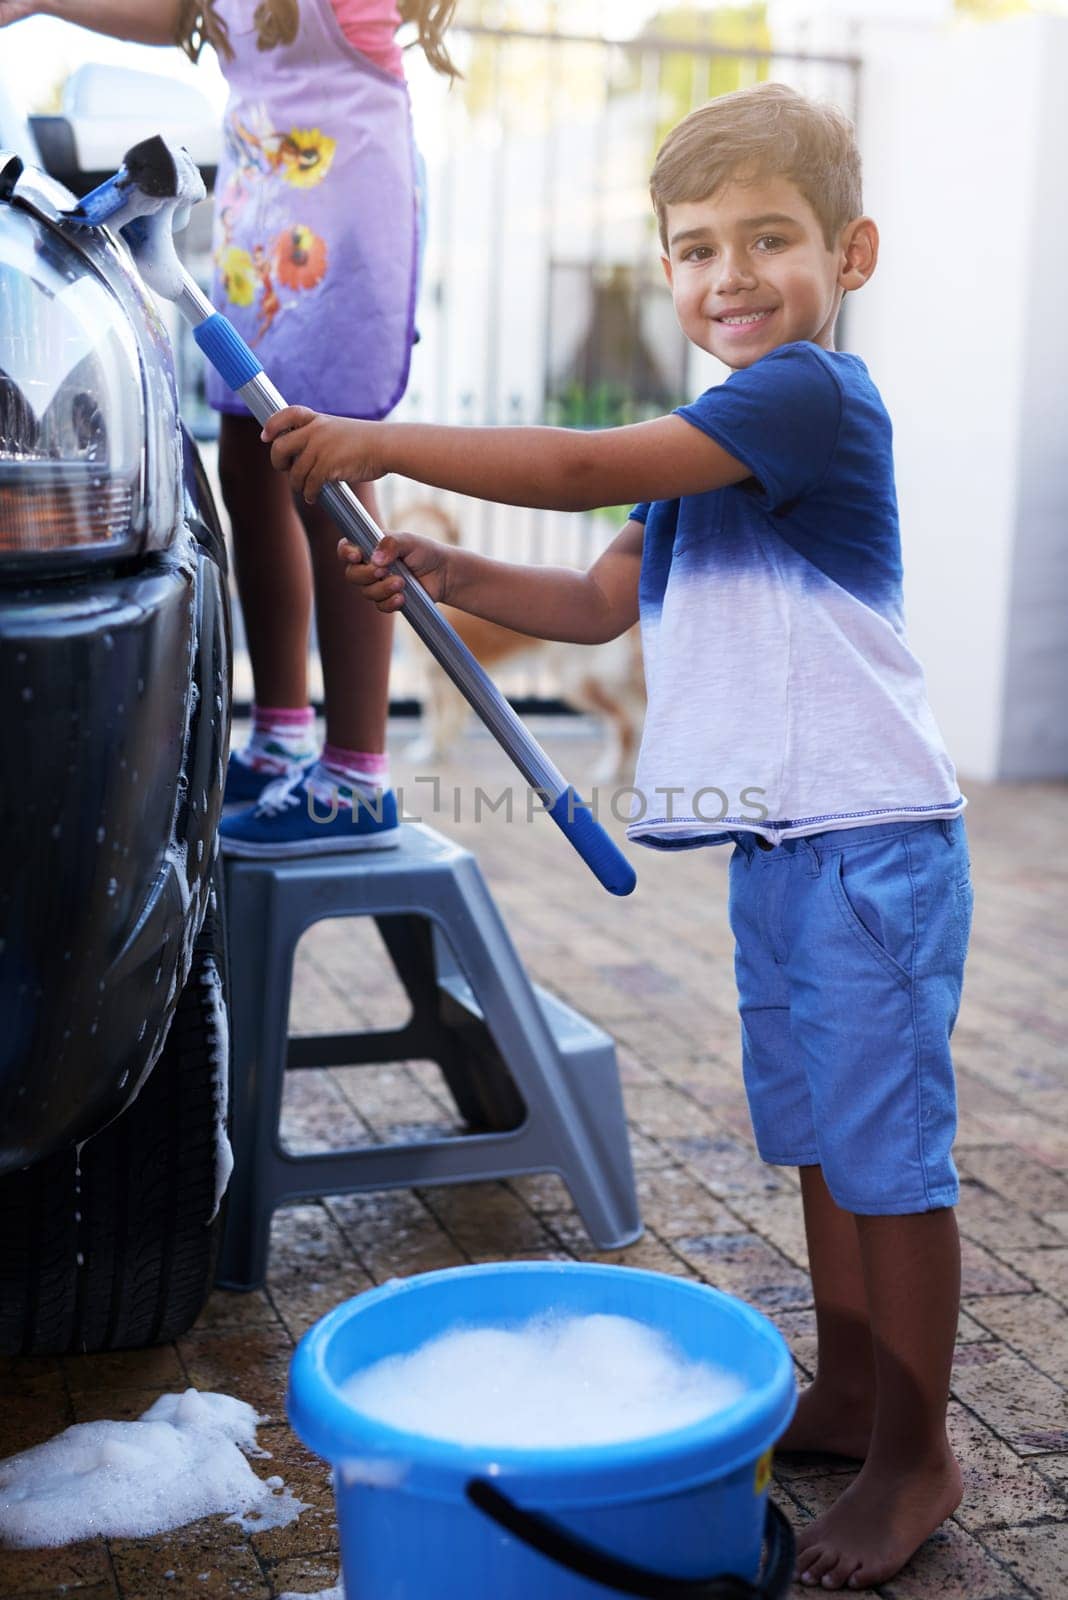 Child, portrait and washing car in home or cleaning responsibility for chore, task or helping. Boy, smile and bubble soap on vehicle for dirty transport or independence teamwork, learning or youth by YuriArcurs